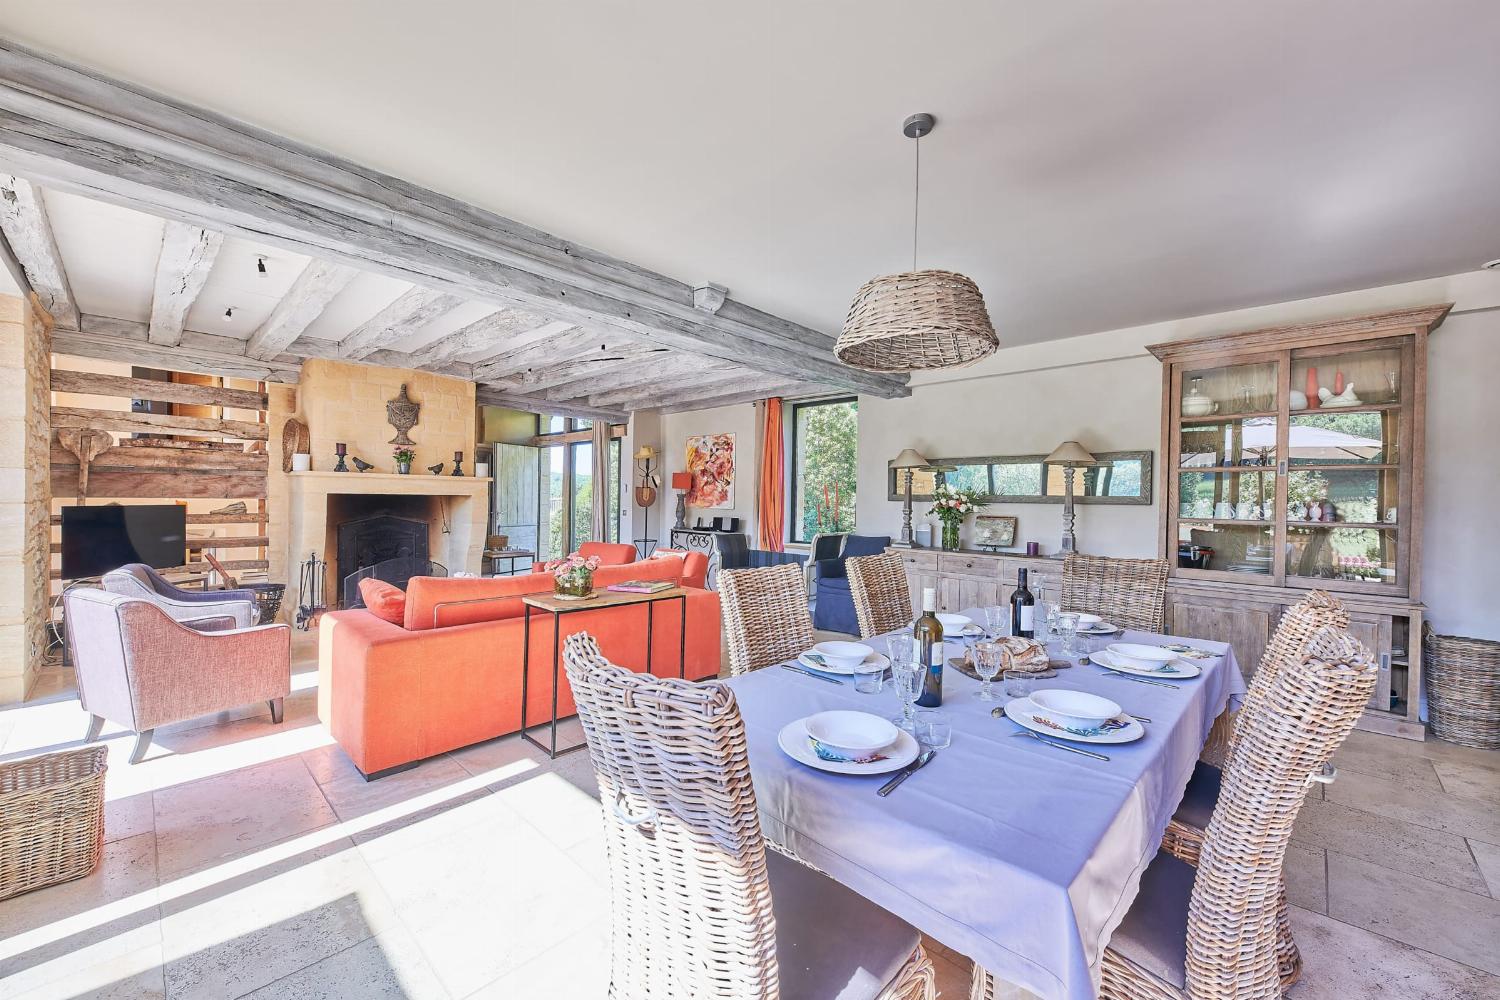 Dining room | Holiday home in Dordogne